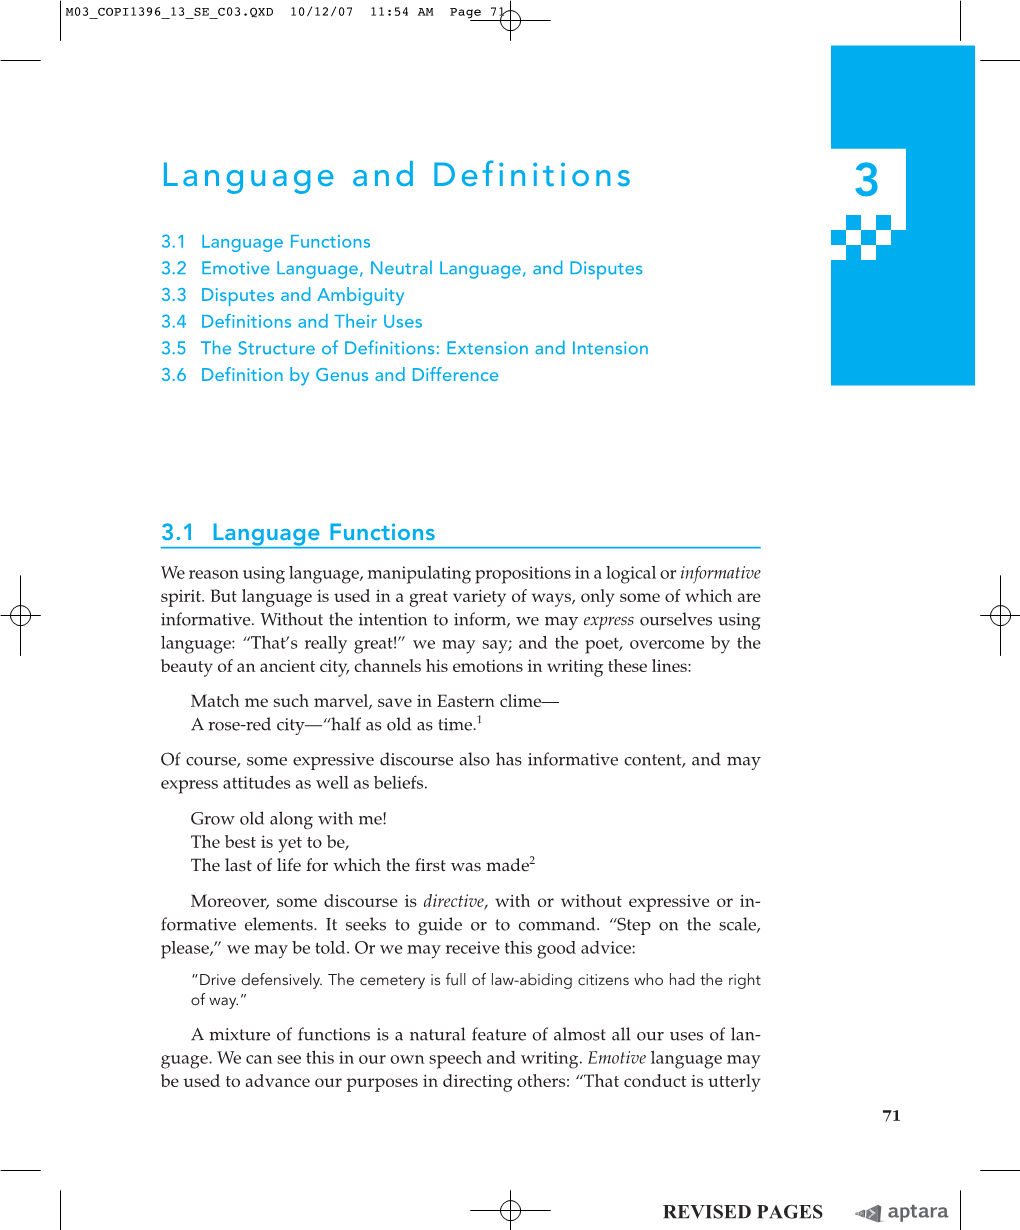 Language and Definitions 3